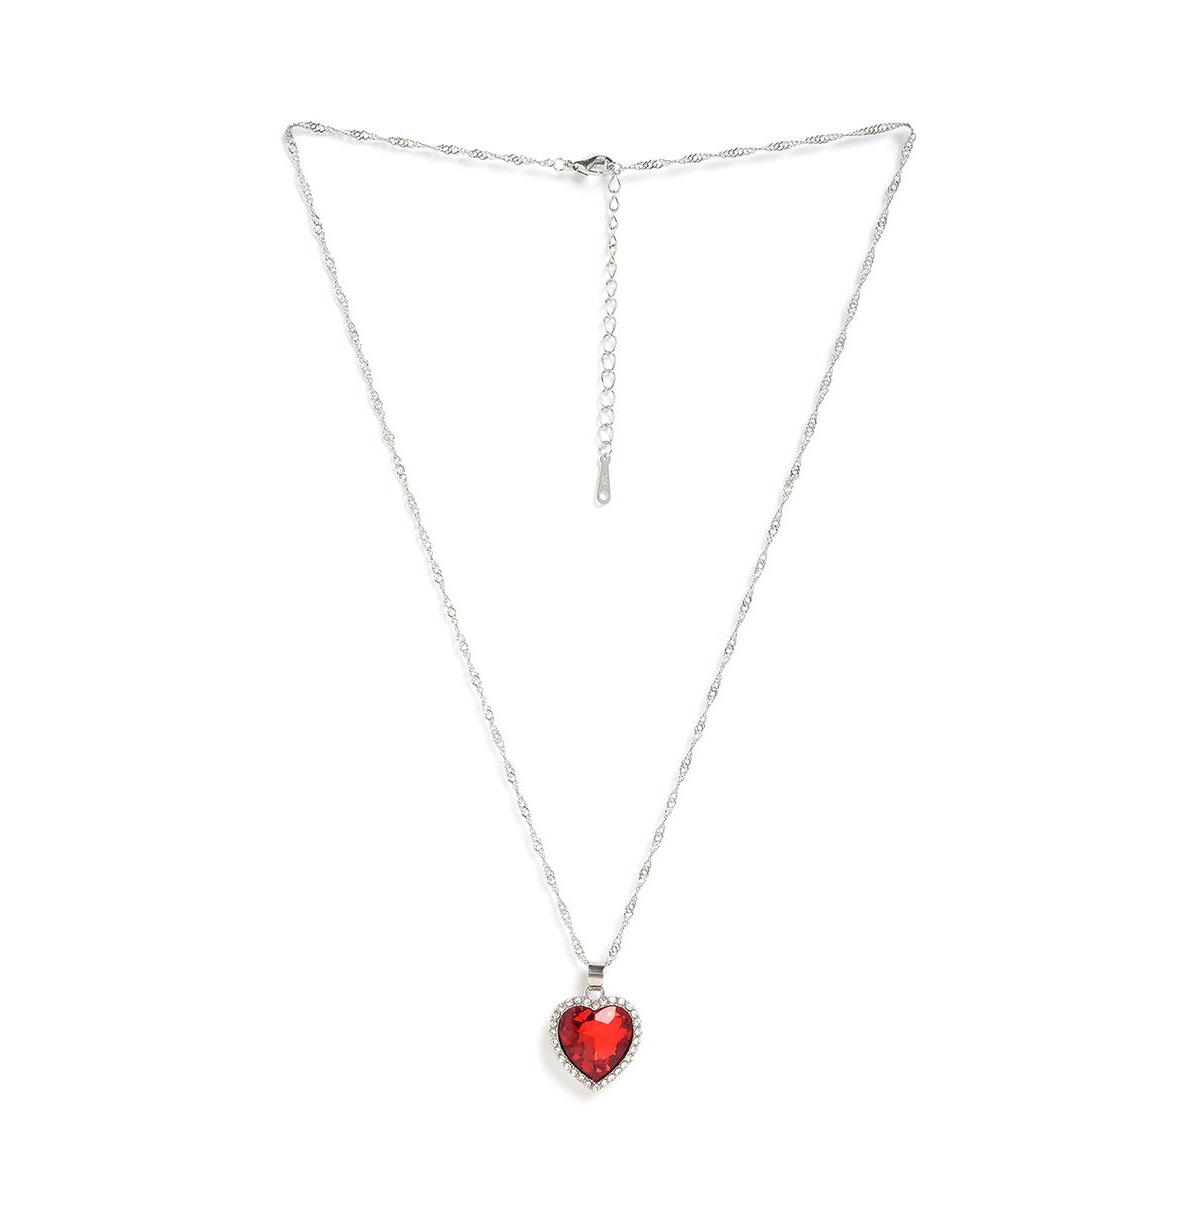 Sohi Women's Red Heart Stone Pendant Necklace